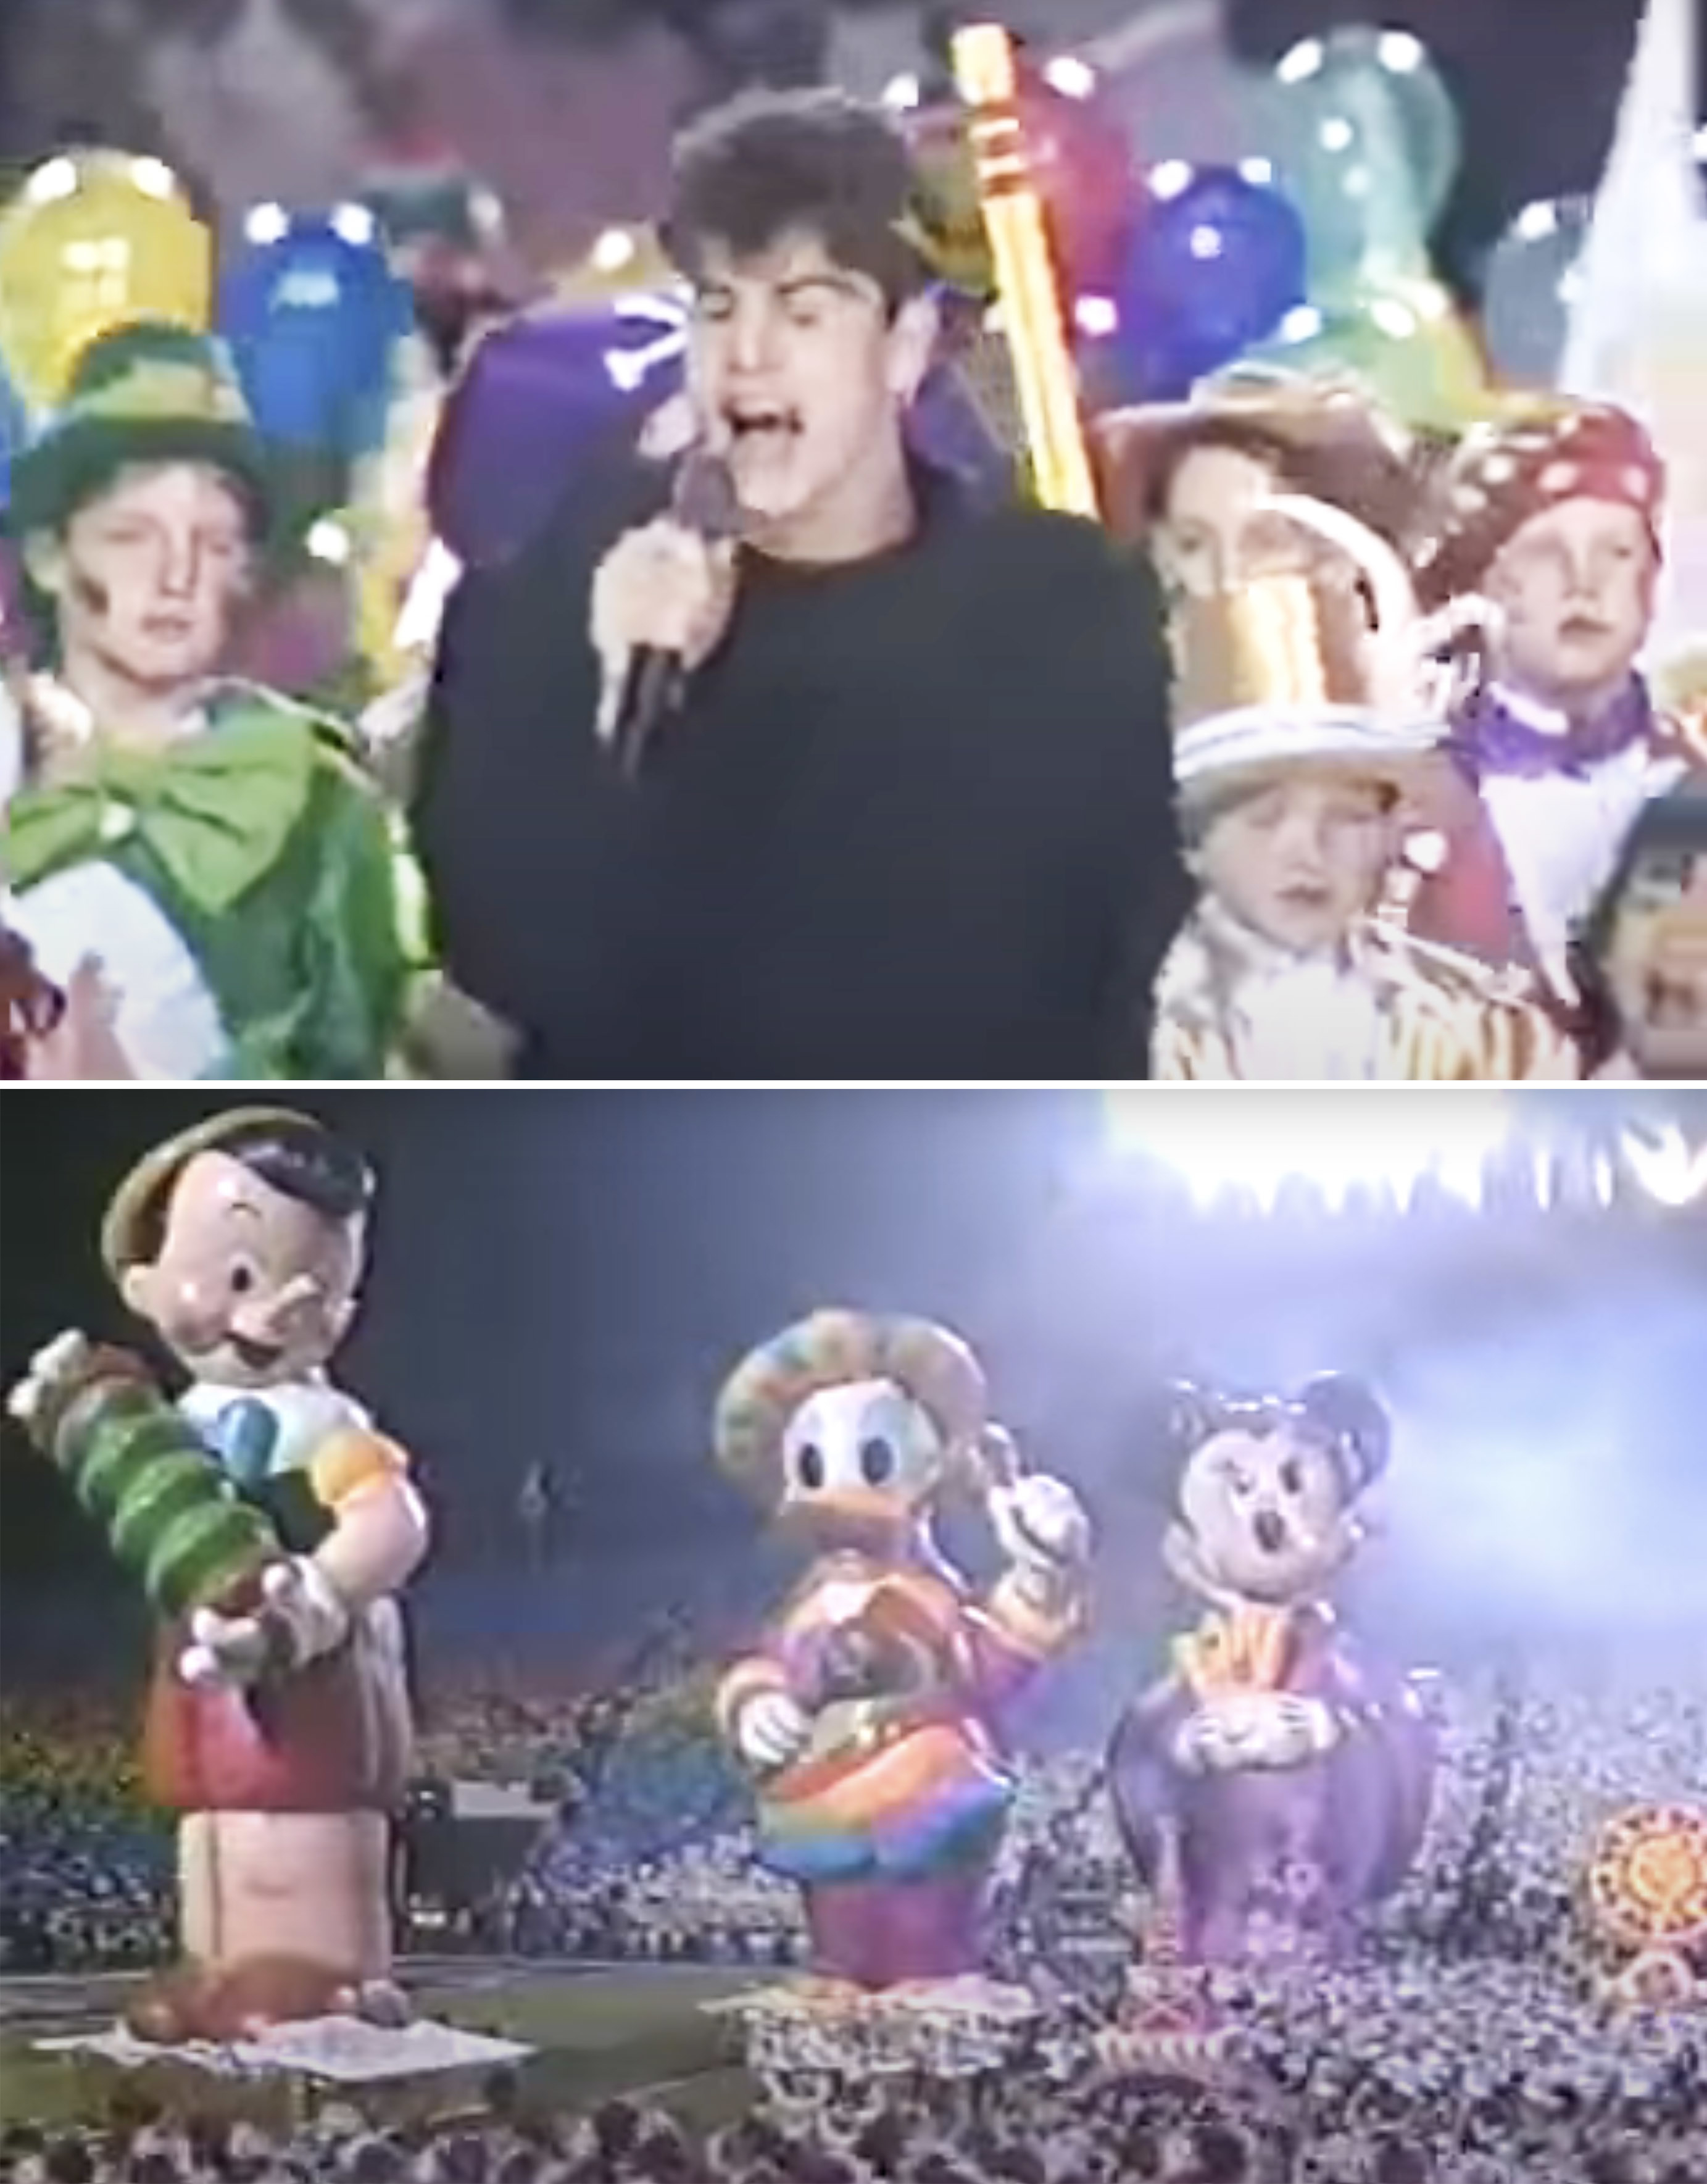 the group singing on stage and large disney characters on the field